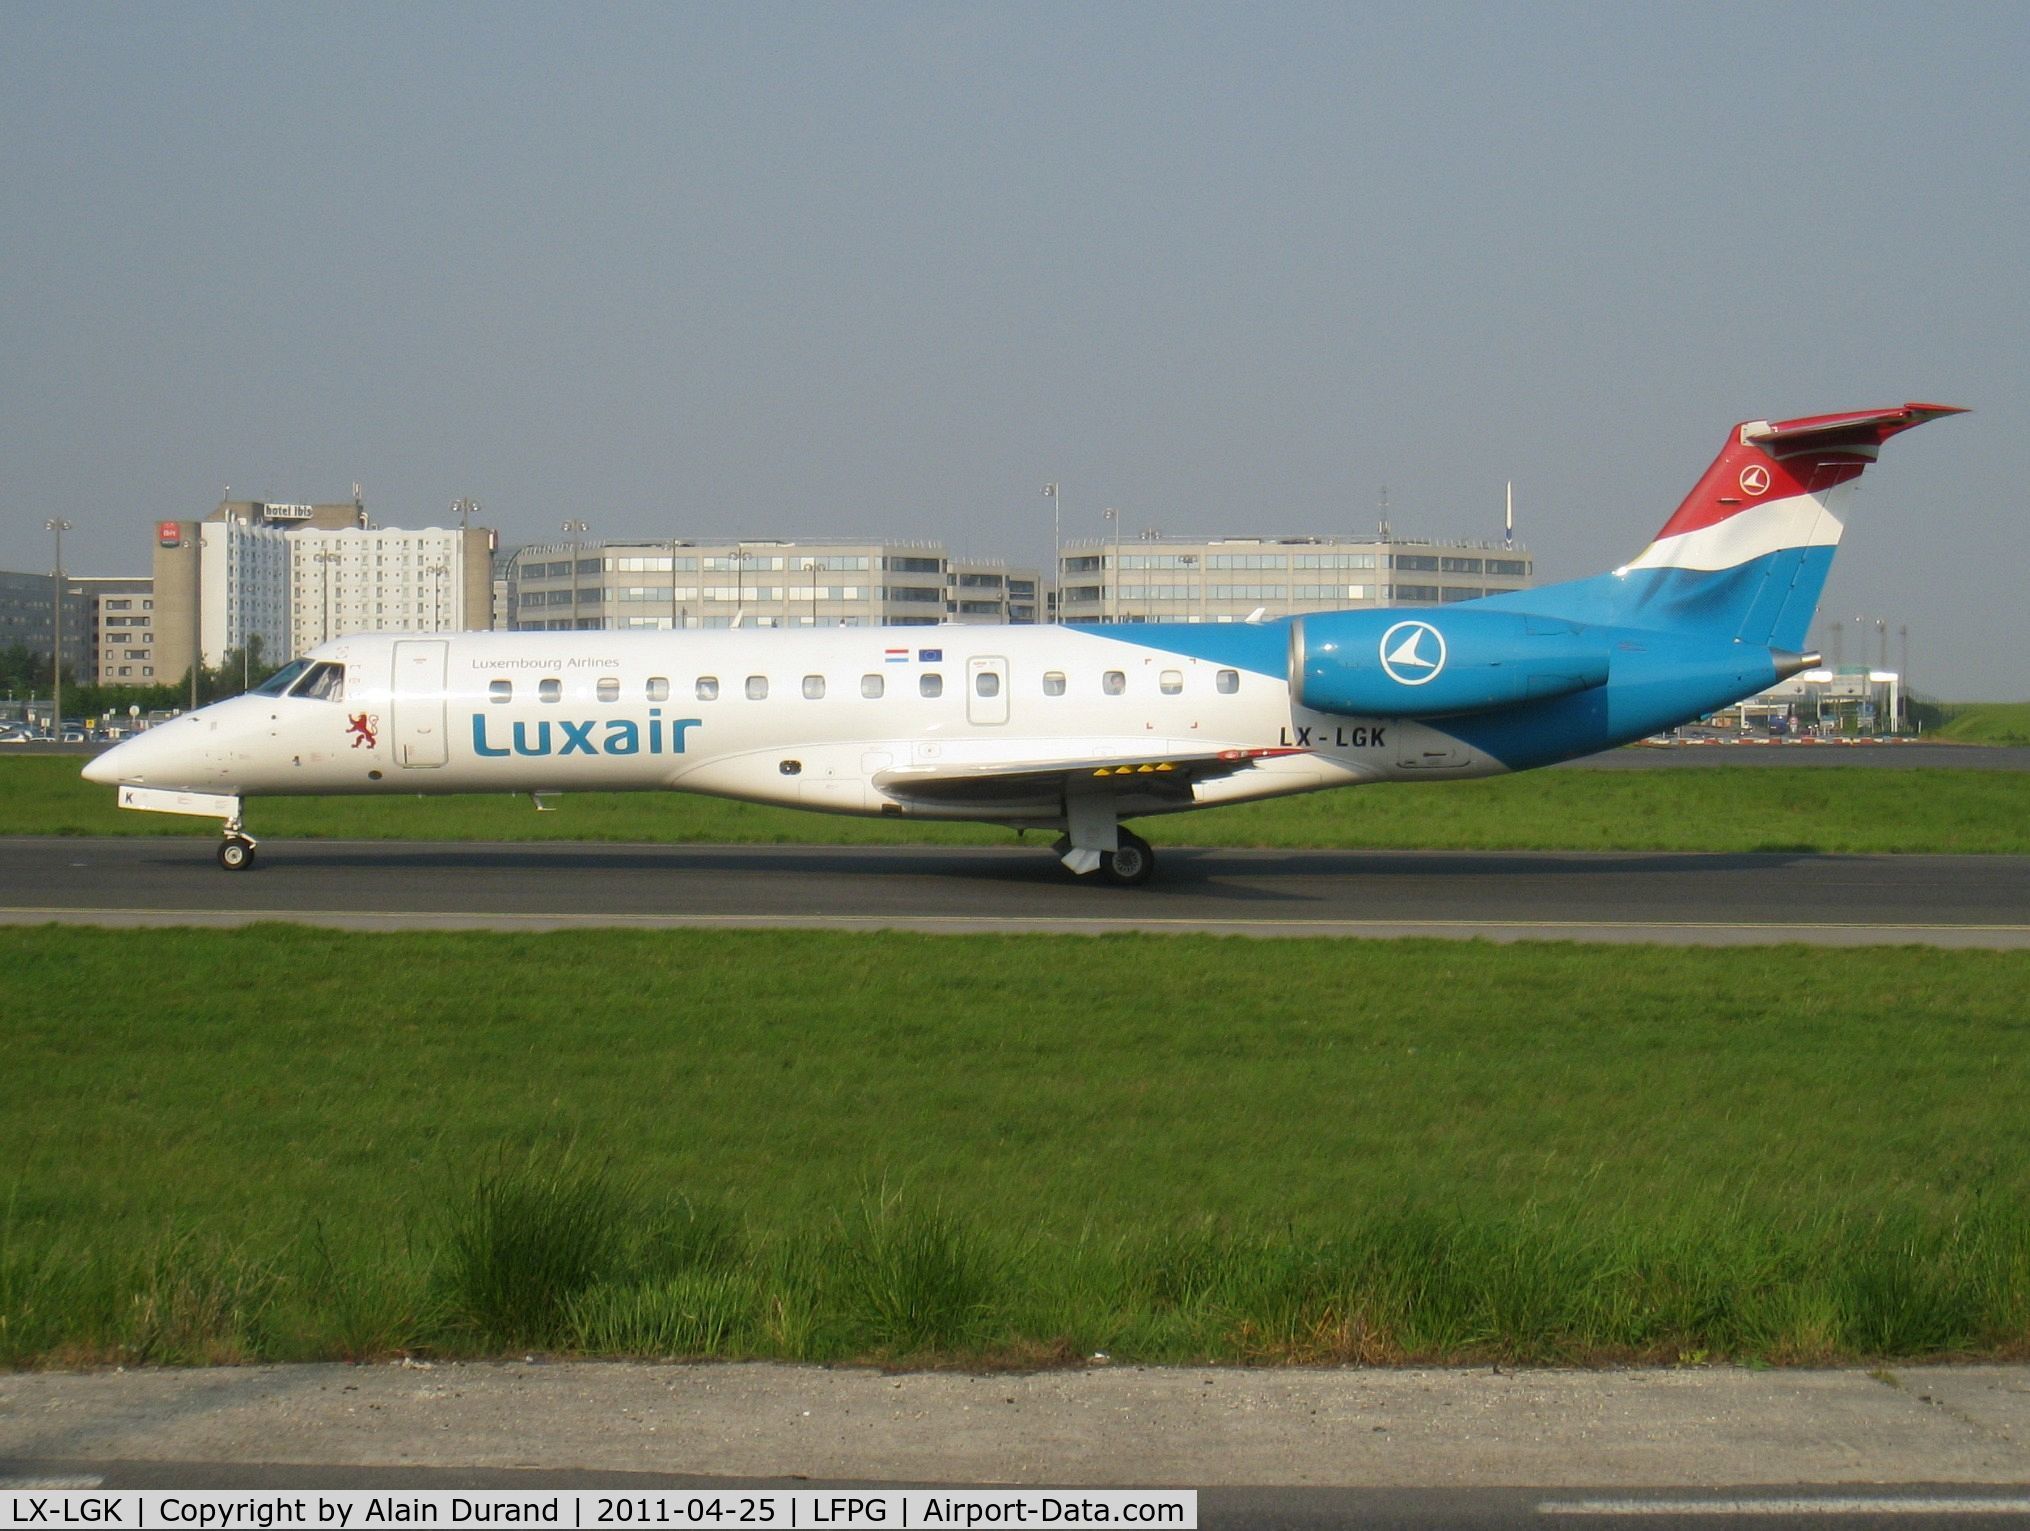 LX-LGK, 2005 Embraer ERJ-135LR (EMB-135LR) C/N 14500886, Luxair has been serving Paris for decades starting with Fokker 27s through Le Bourget. Today, the airline serves CDG with a mix of ERJ 135/145 and Dash 8-402Q